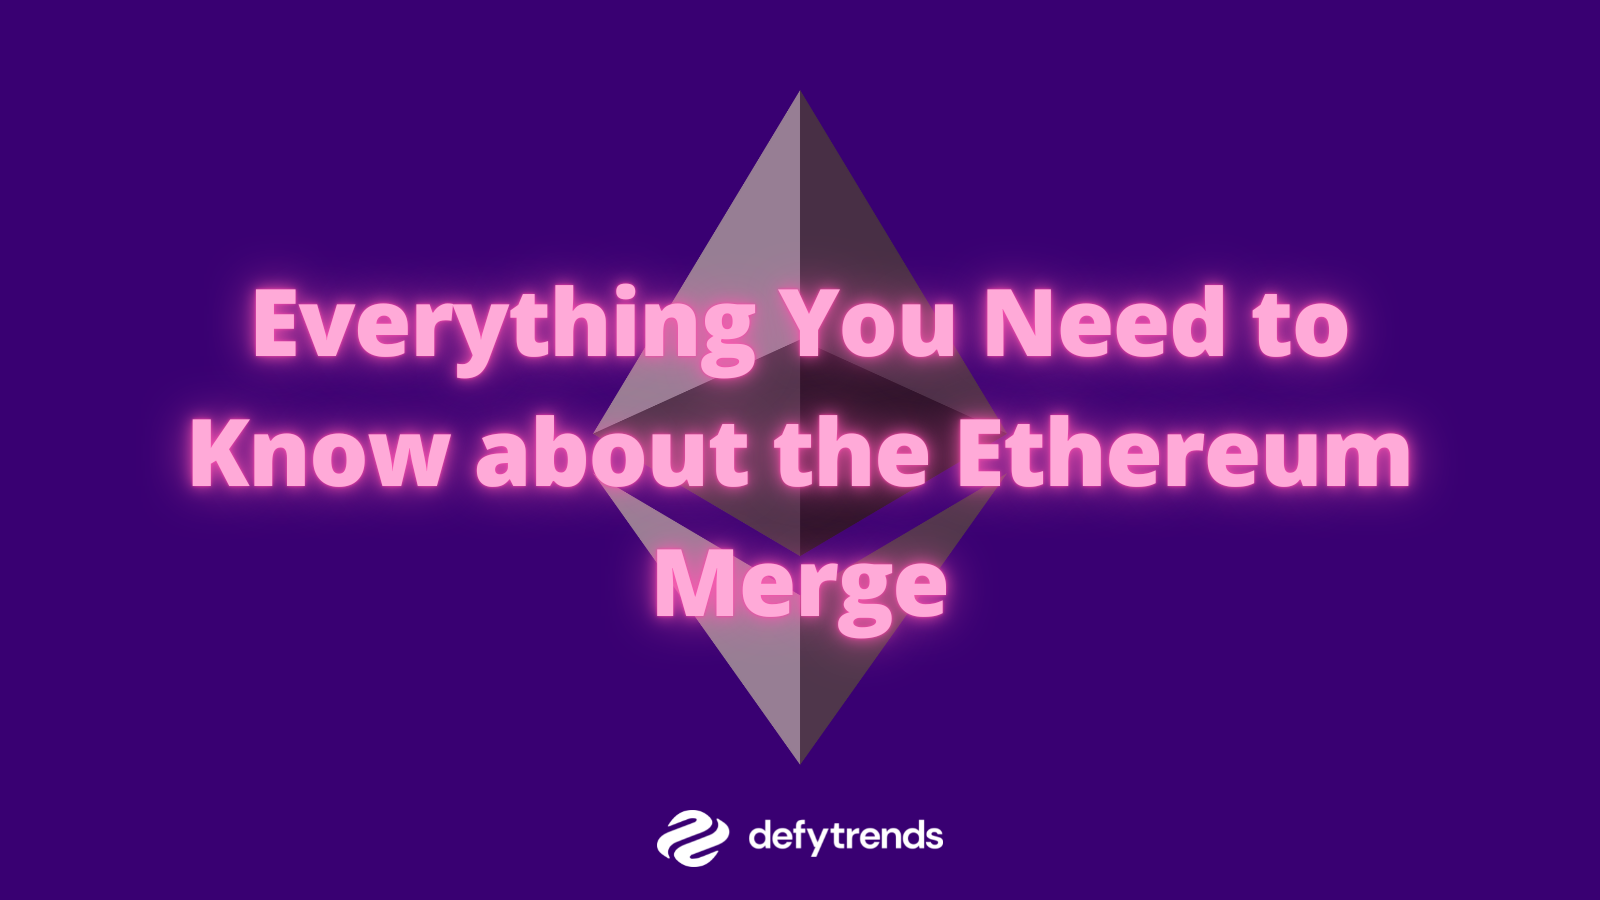 Everything You Need to Know about the Ethereum Merge